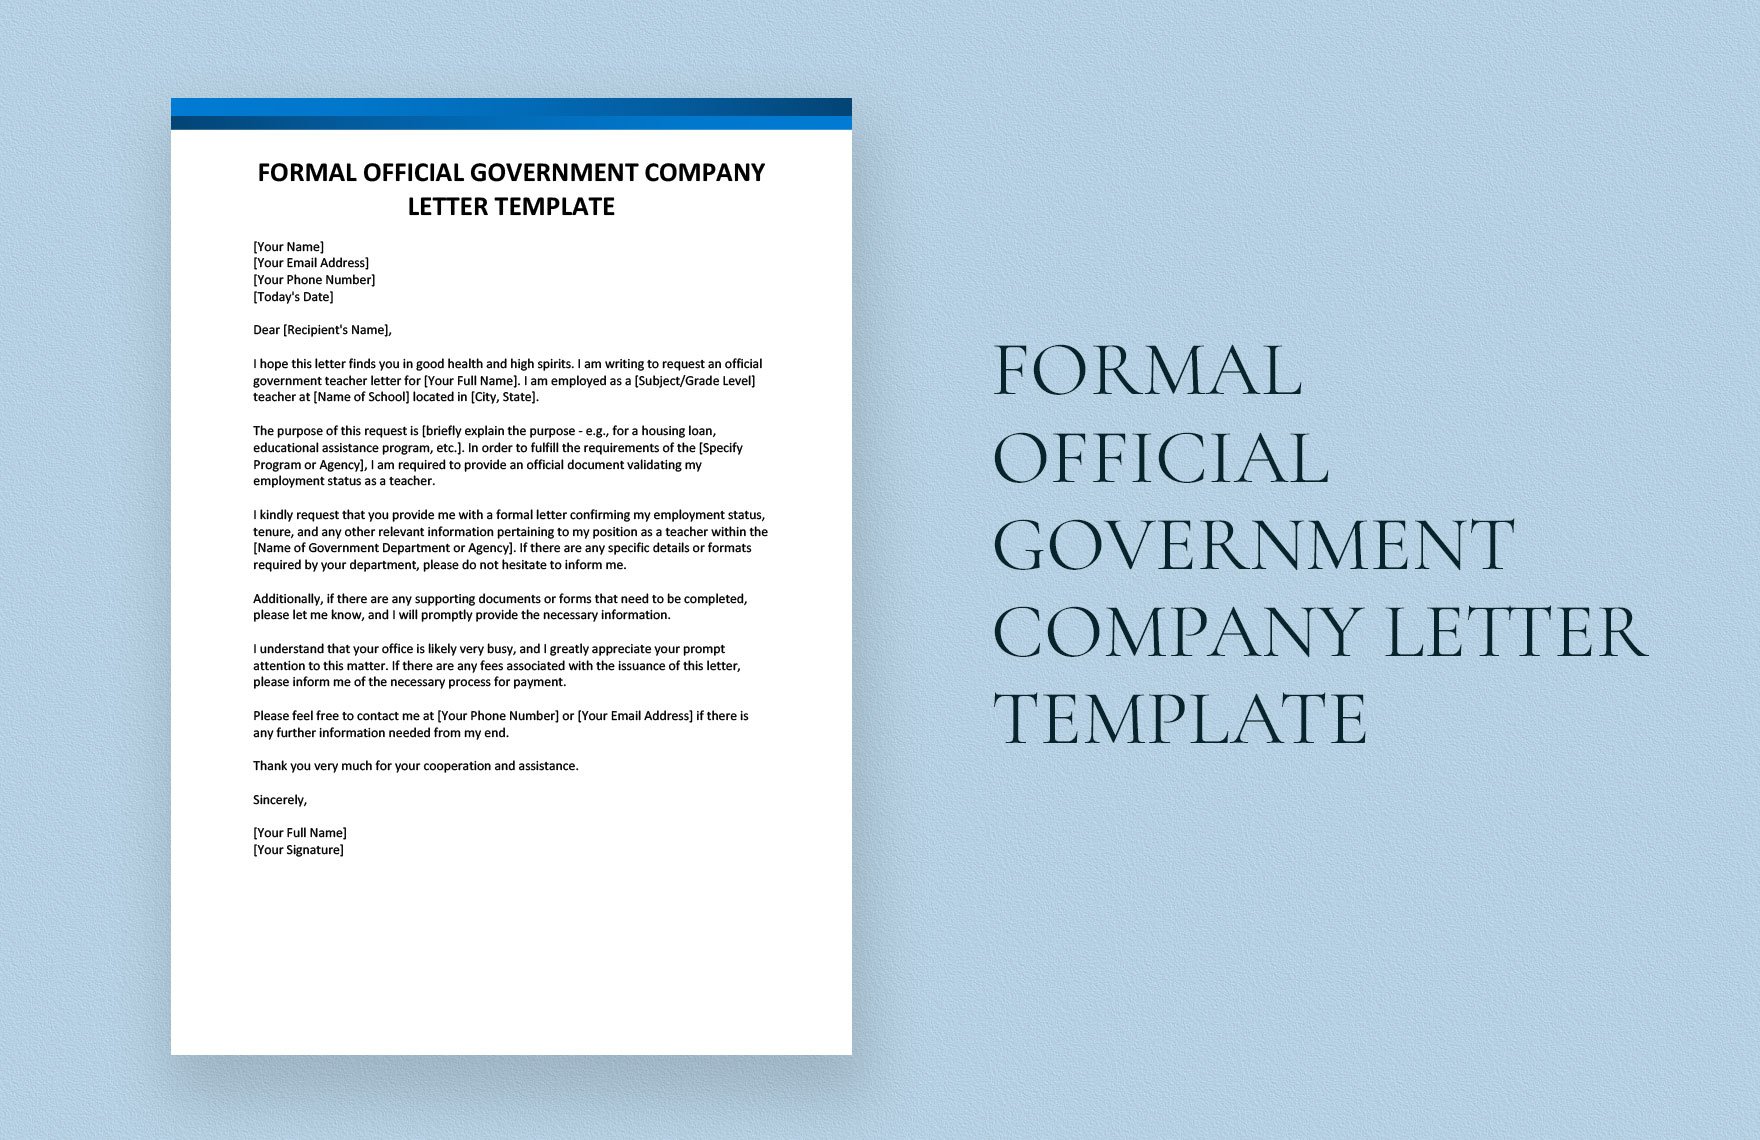 Formal Official Government Company Letter Template